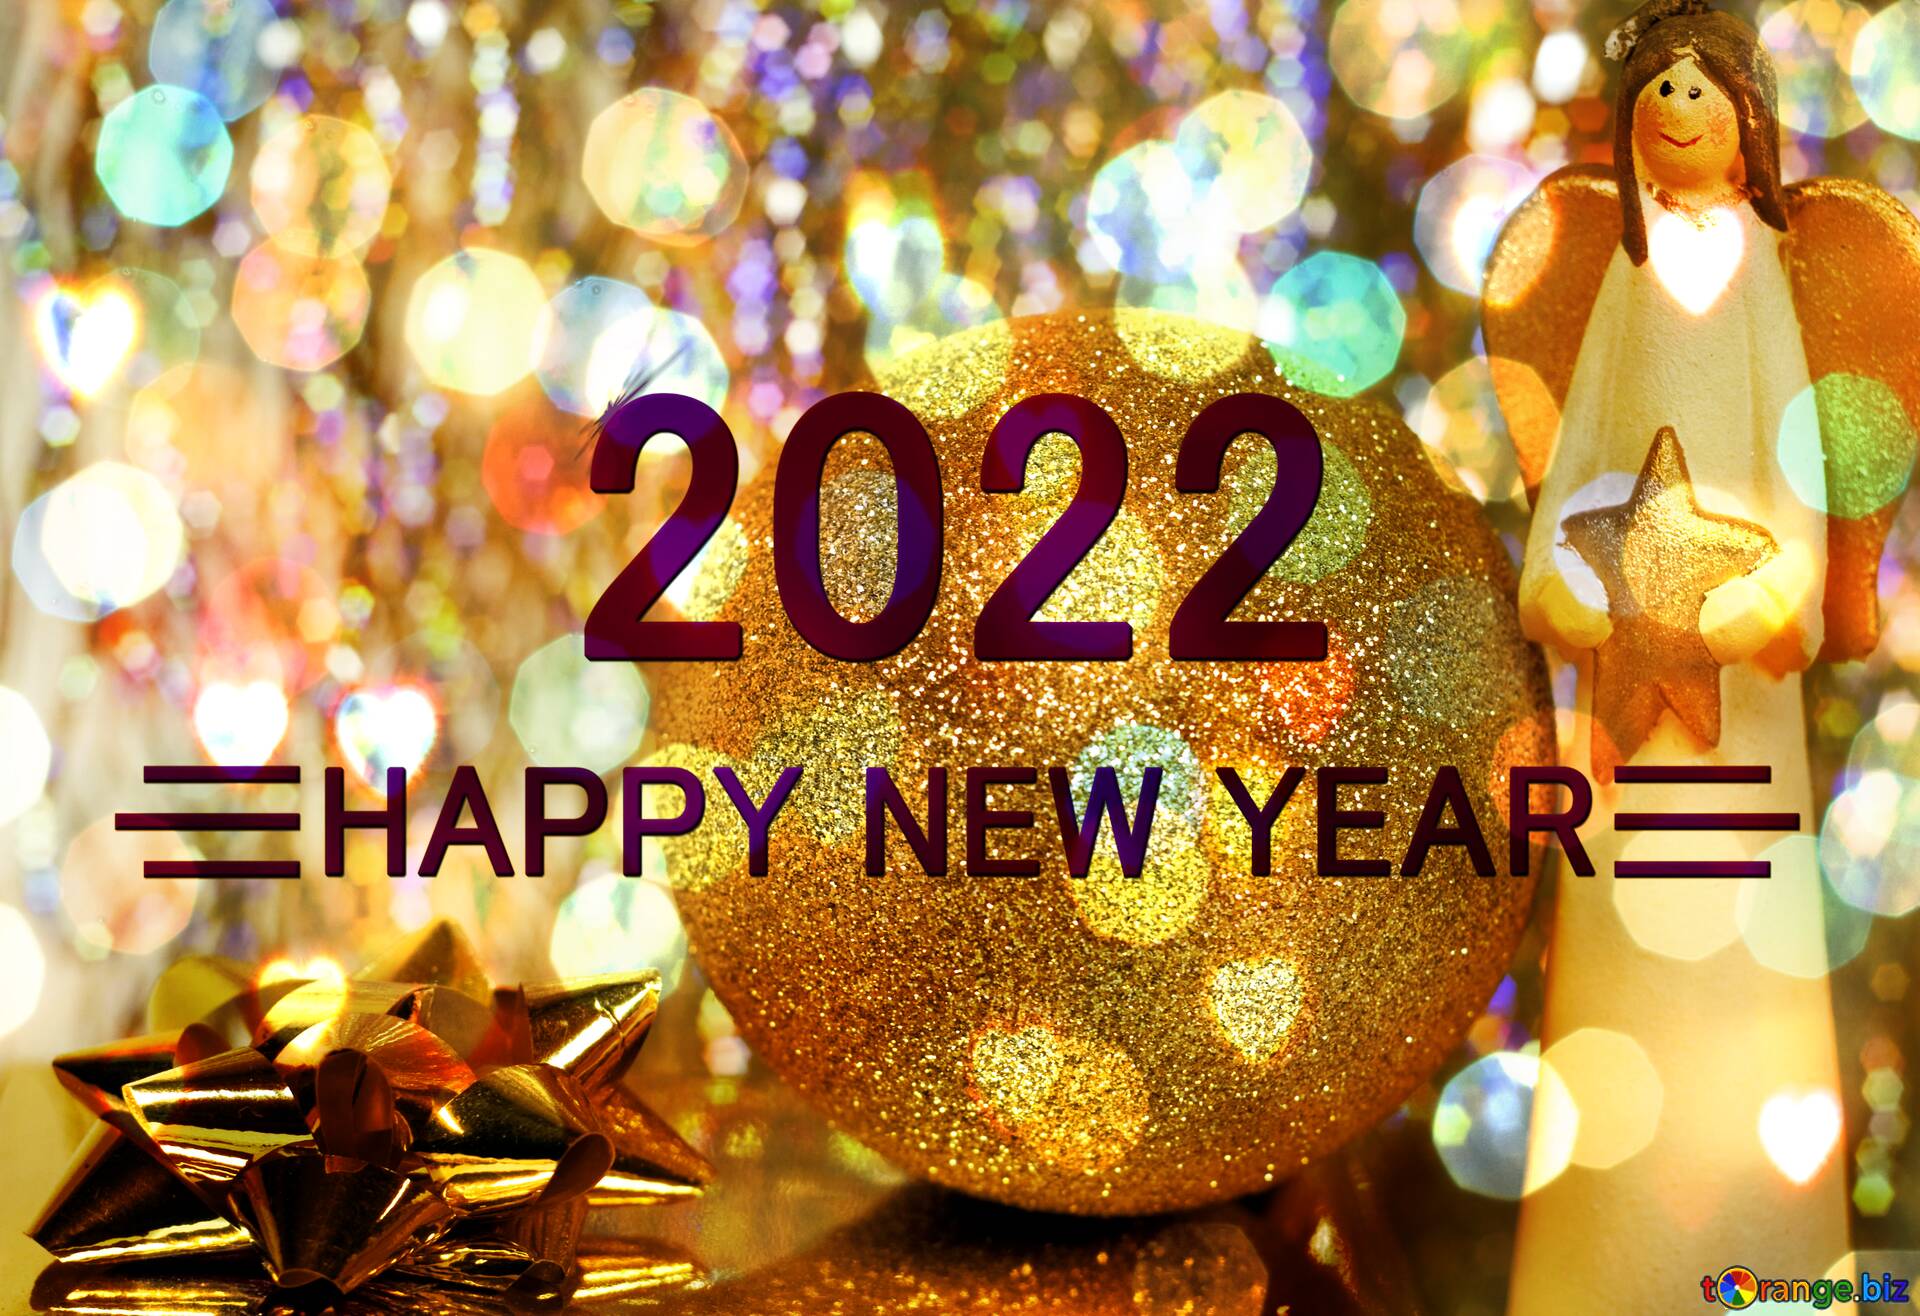 Wallpapers with 2022 holiday new year on the desktop